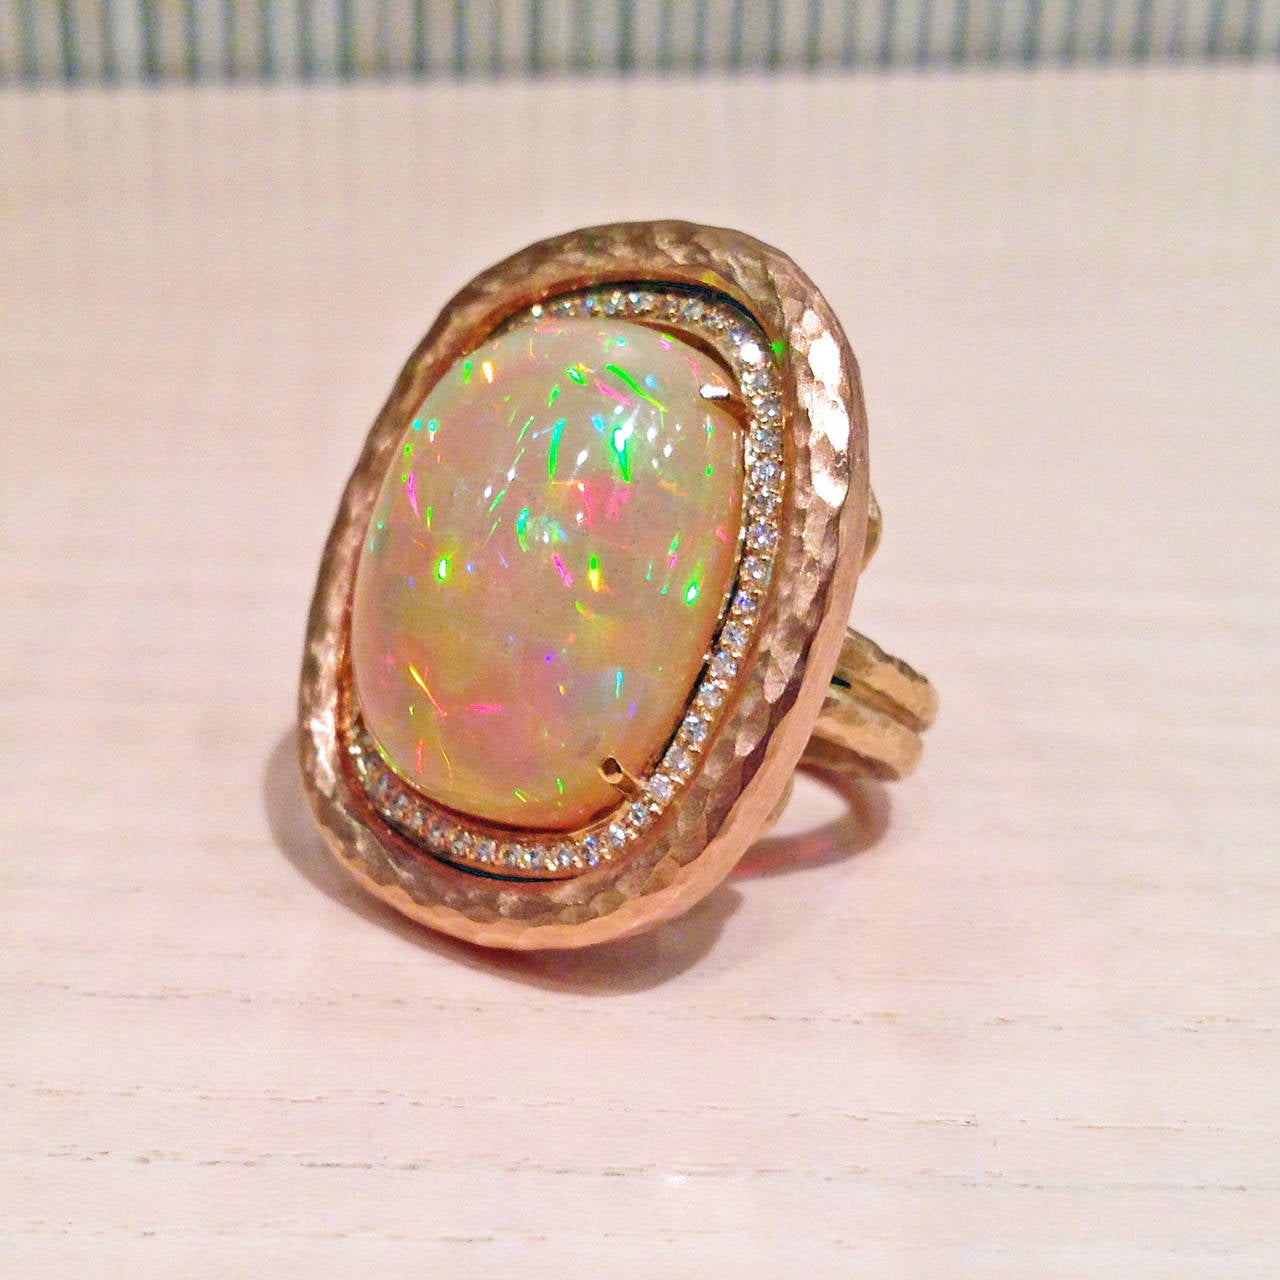 One-of-a-Kind Ring handcrafted by award-winning jewelry designer Pamela Froman showcasing an extraordinary 14.36 carat Ethiopian opal with confetti fire, surrounded by 0.27 carats of F/vs round brilliant-cut white diamonds and set in a hammered and